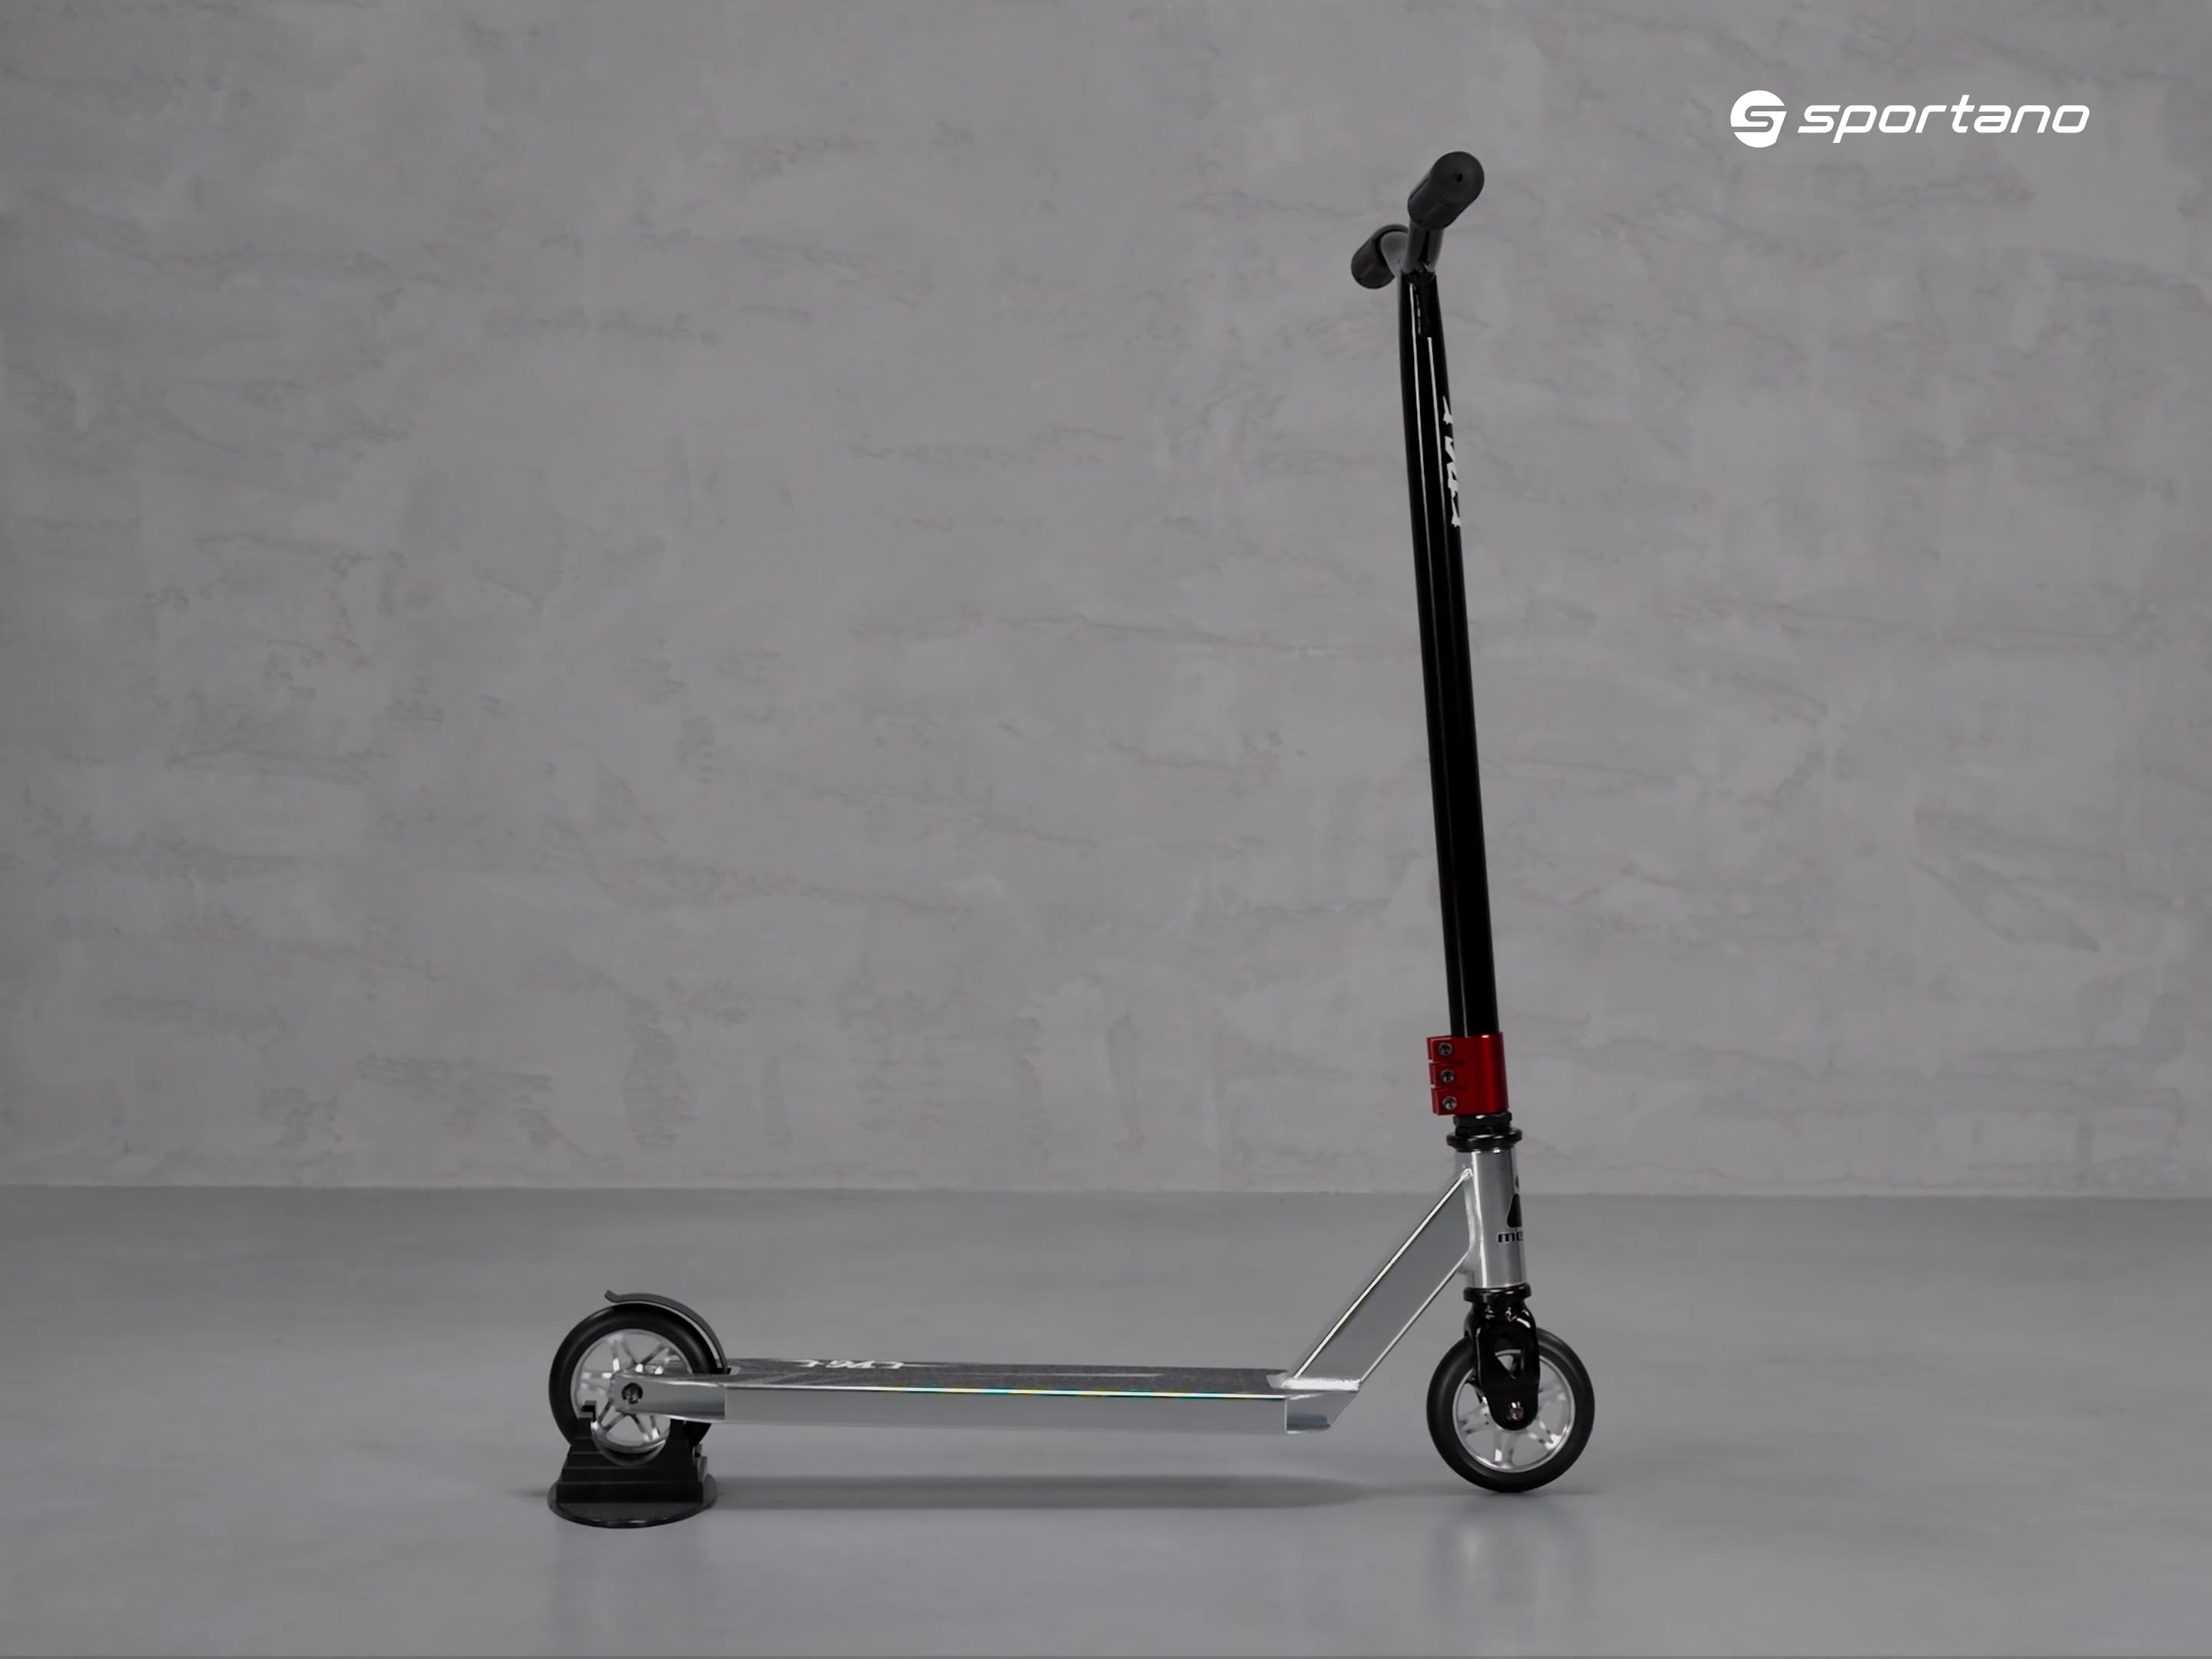 Meteor Edge Freestyle Scooter silber 22615